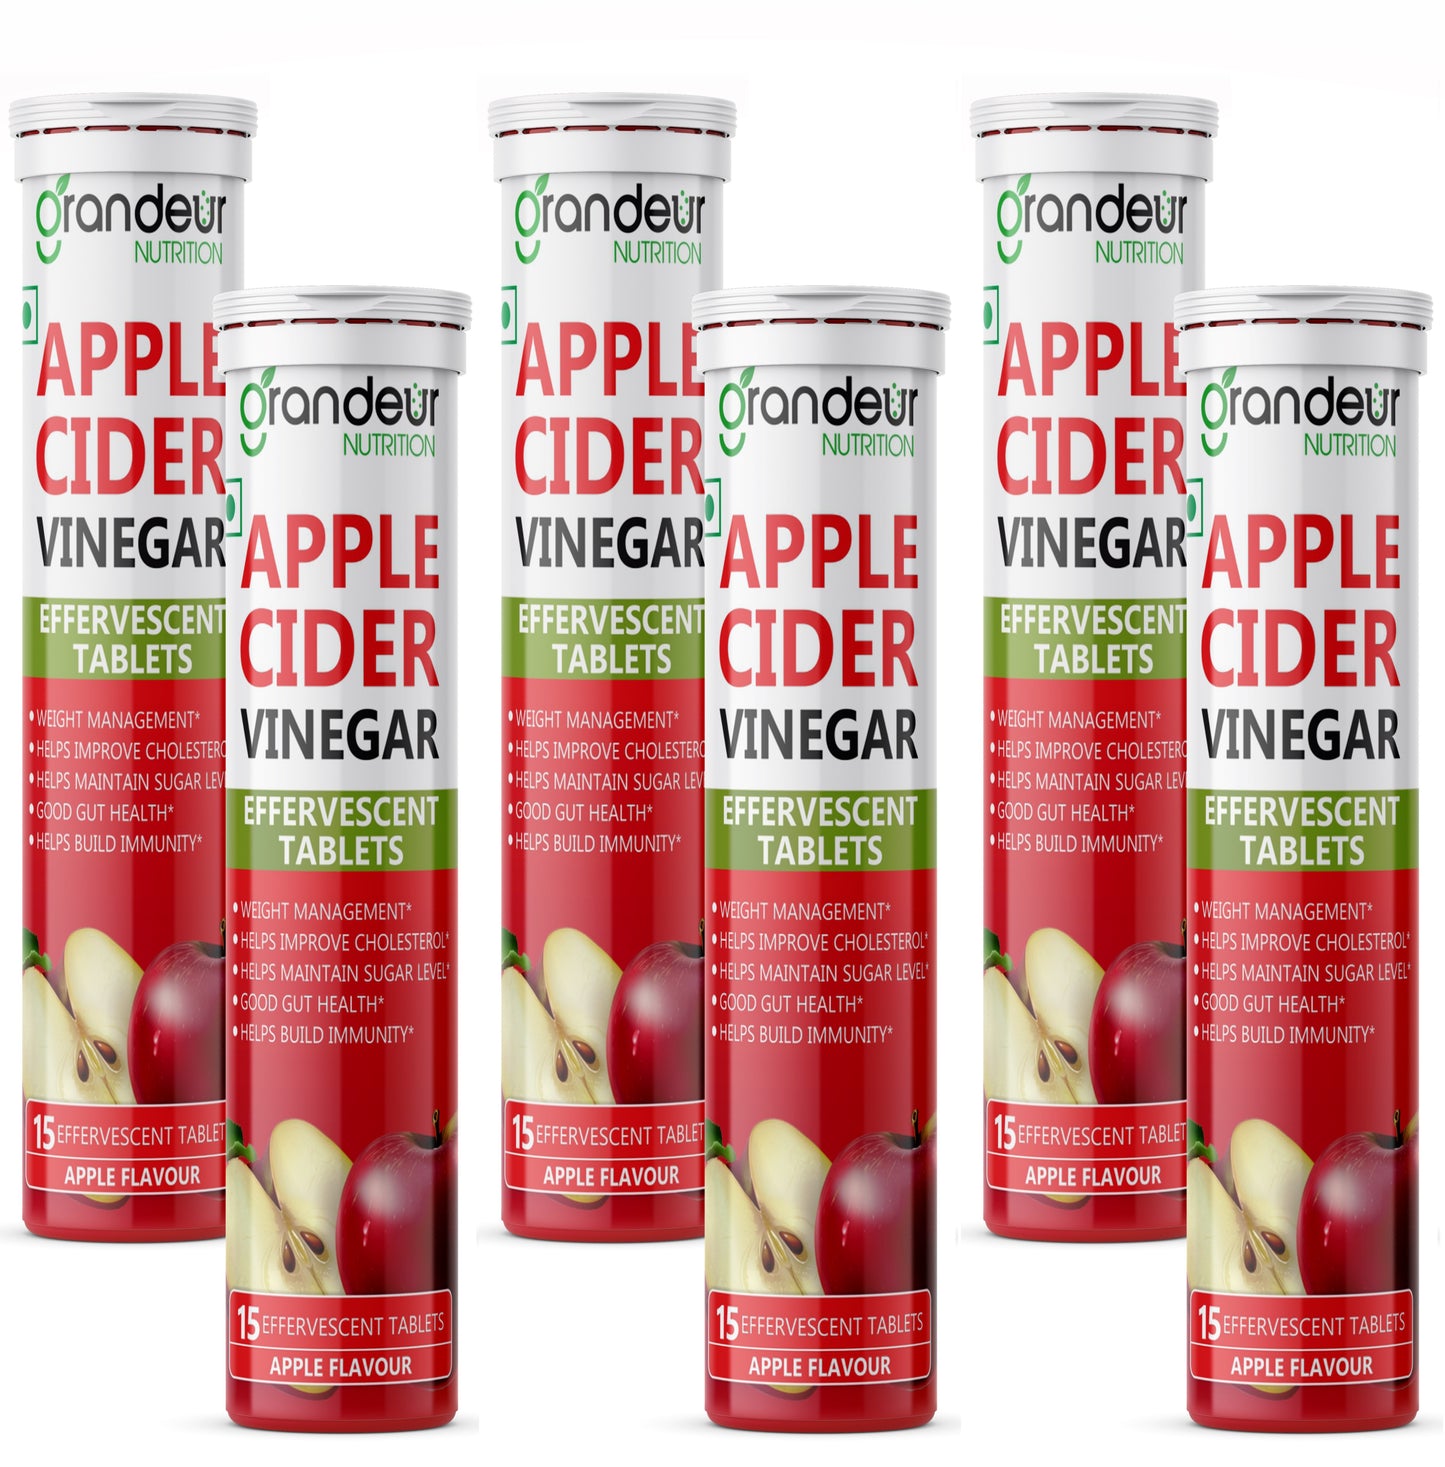 Grandeur Plant Based Apple Cider Vinegar Effervescent Tablets With 500 mg Apple Cider, Pomegranate Extract 100 mg, Vitamin B6, B12 - Sugar Free, For Immunity & Weight Management